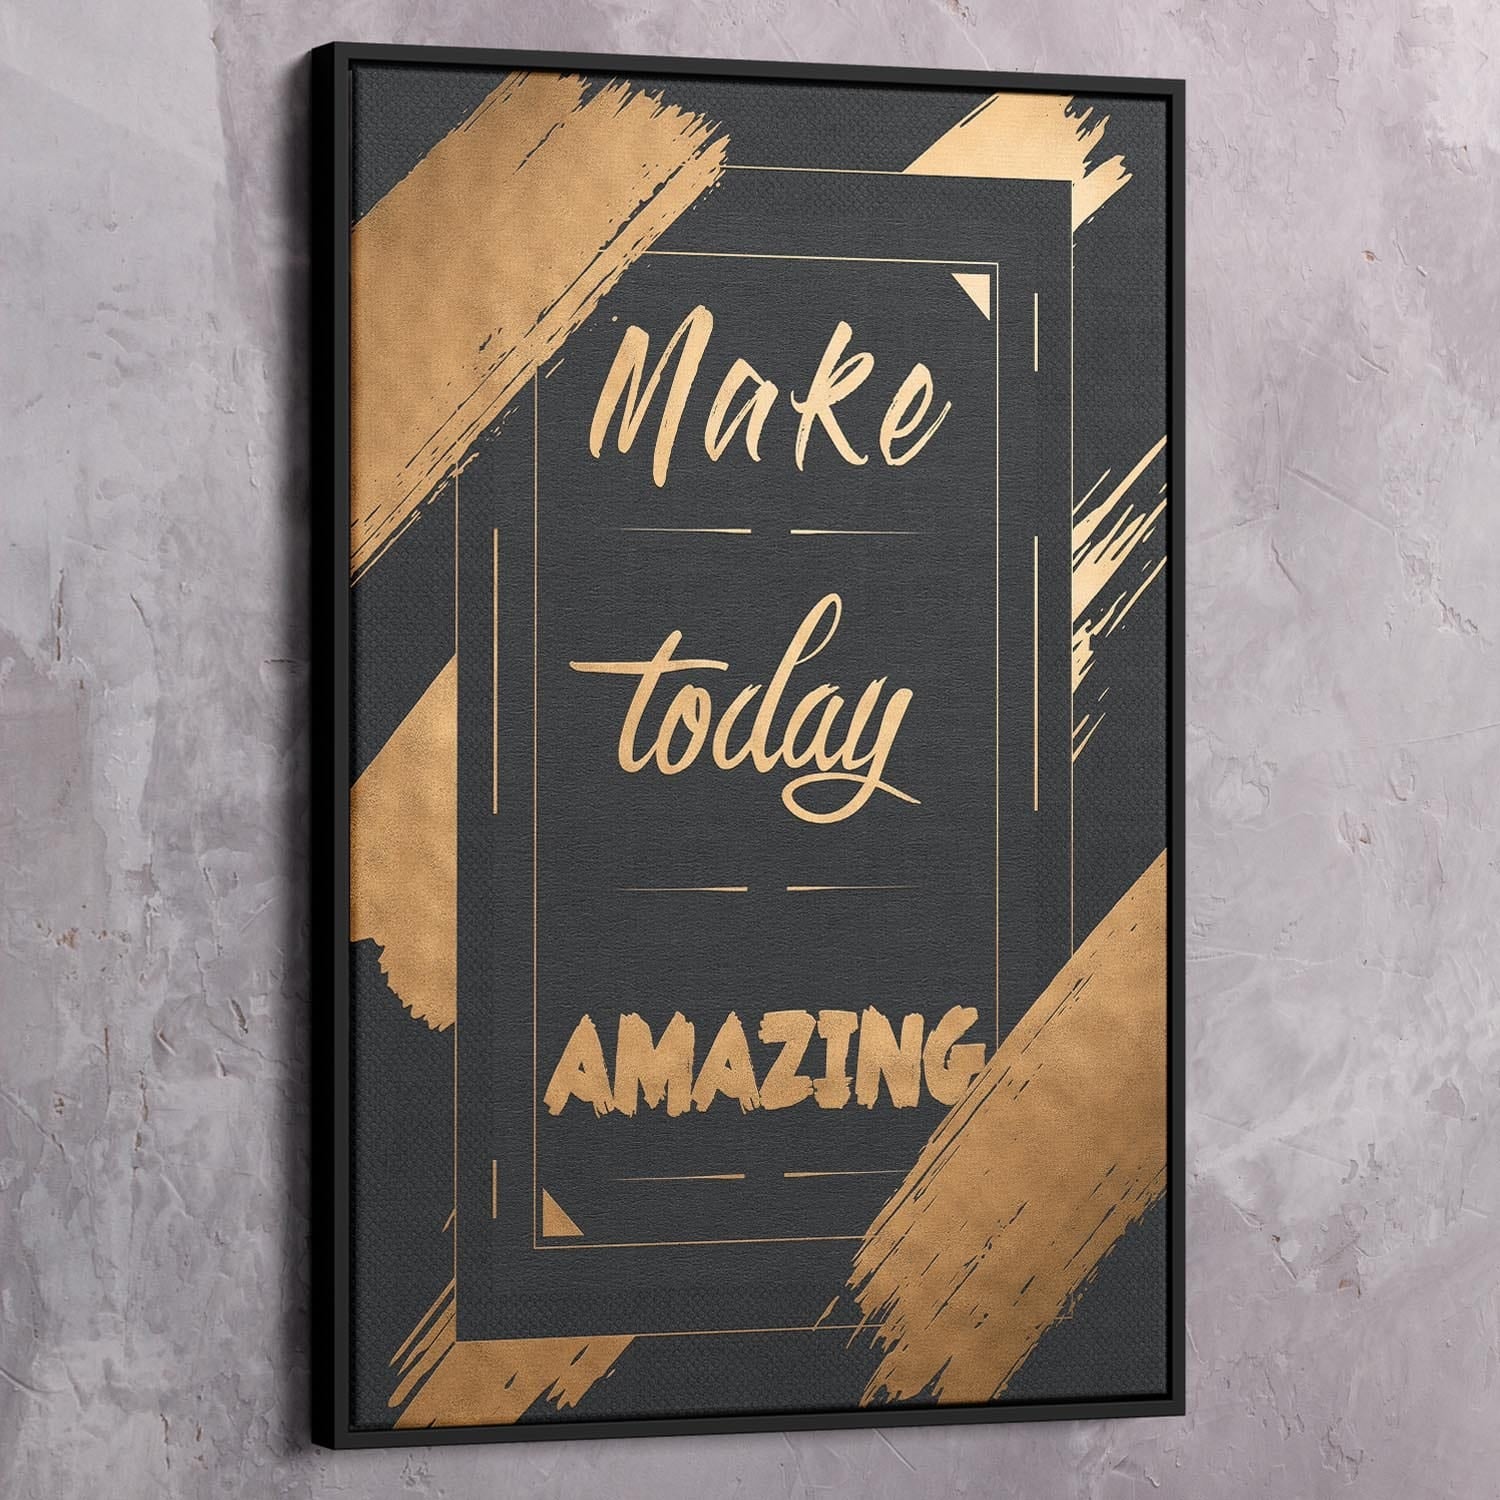 Make Today Amazing Wall Art | Inspirational Wall Art Motivational Wall Art Quotes Office Art | ImpaktMaker Exclusive Canvas Art Portrait